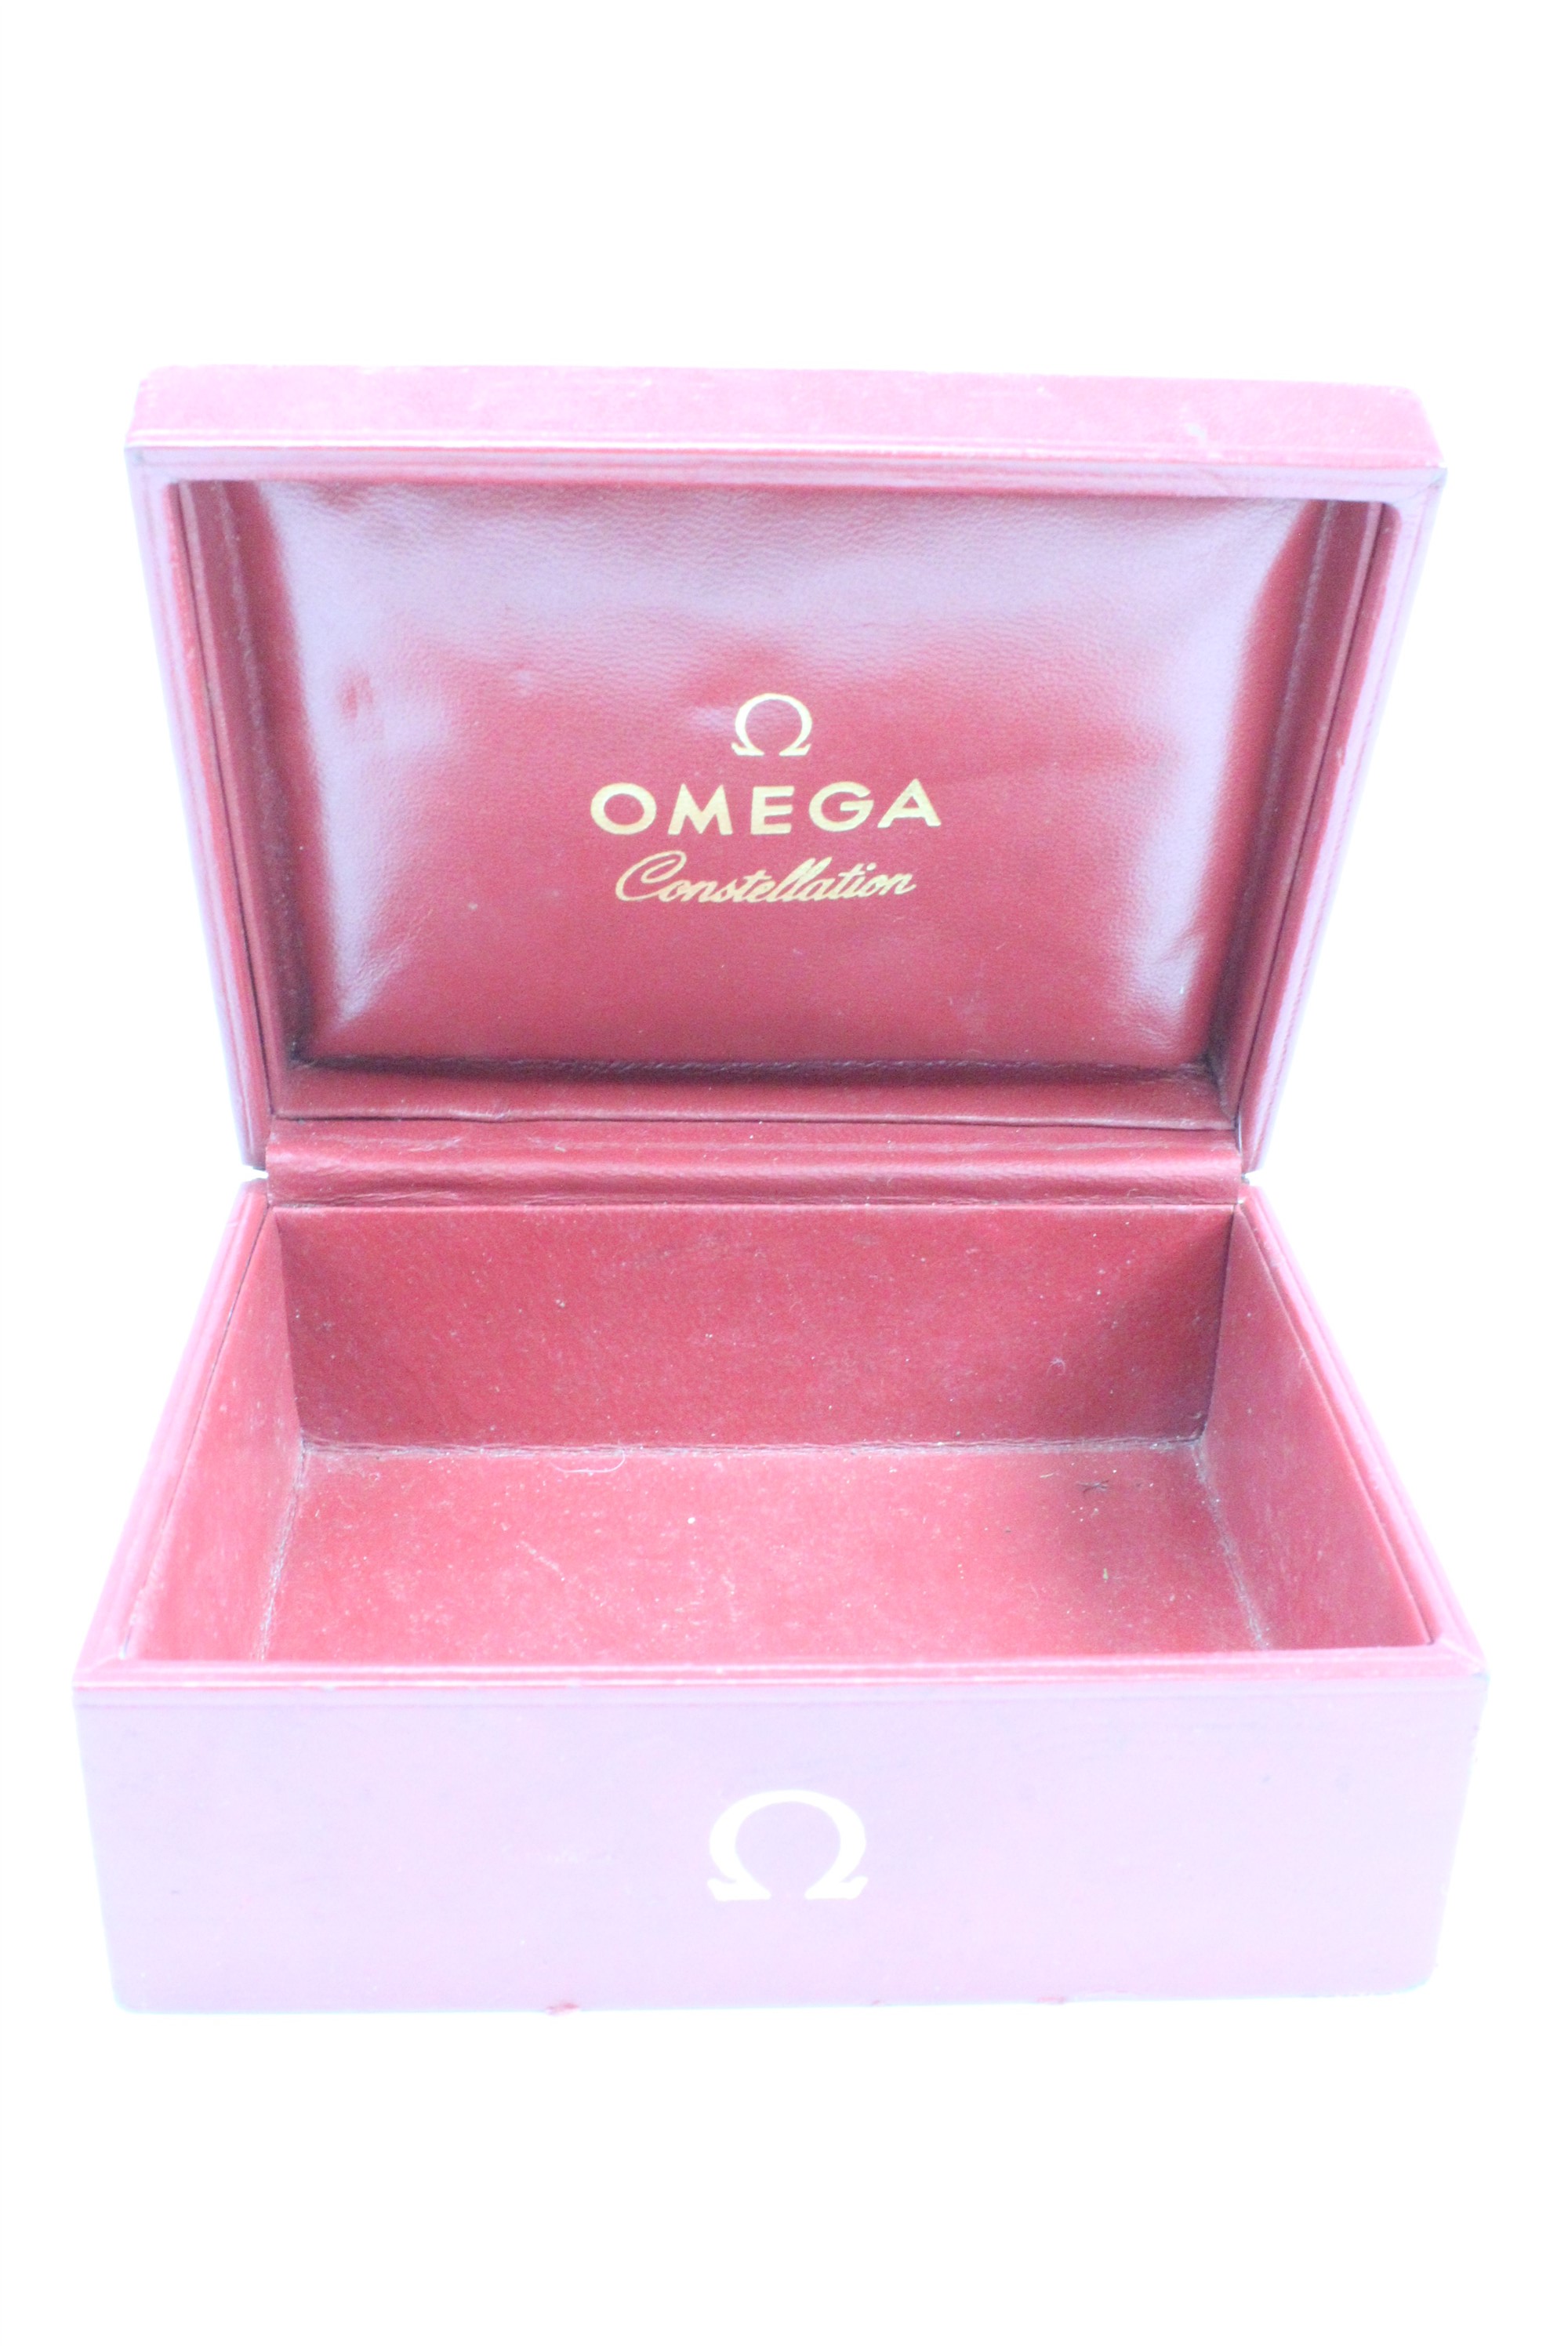 A vintage Omega "Constellation" watch box - Image 2 of 2